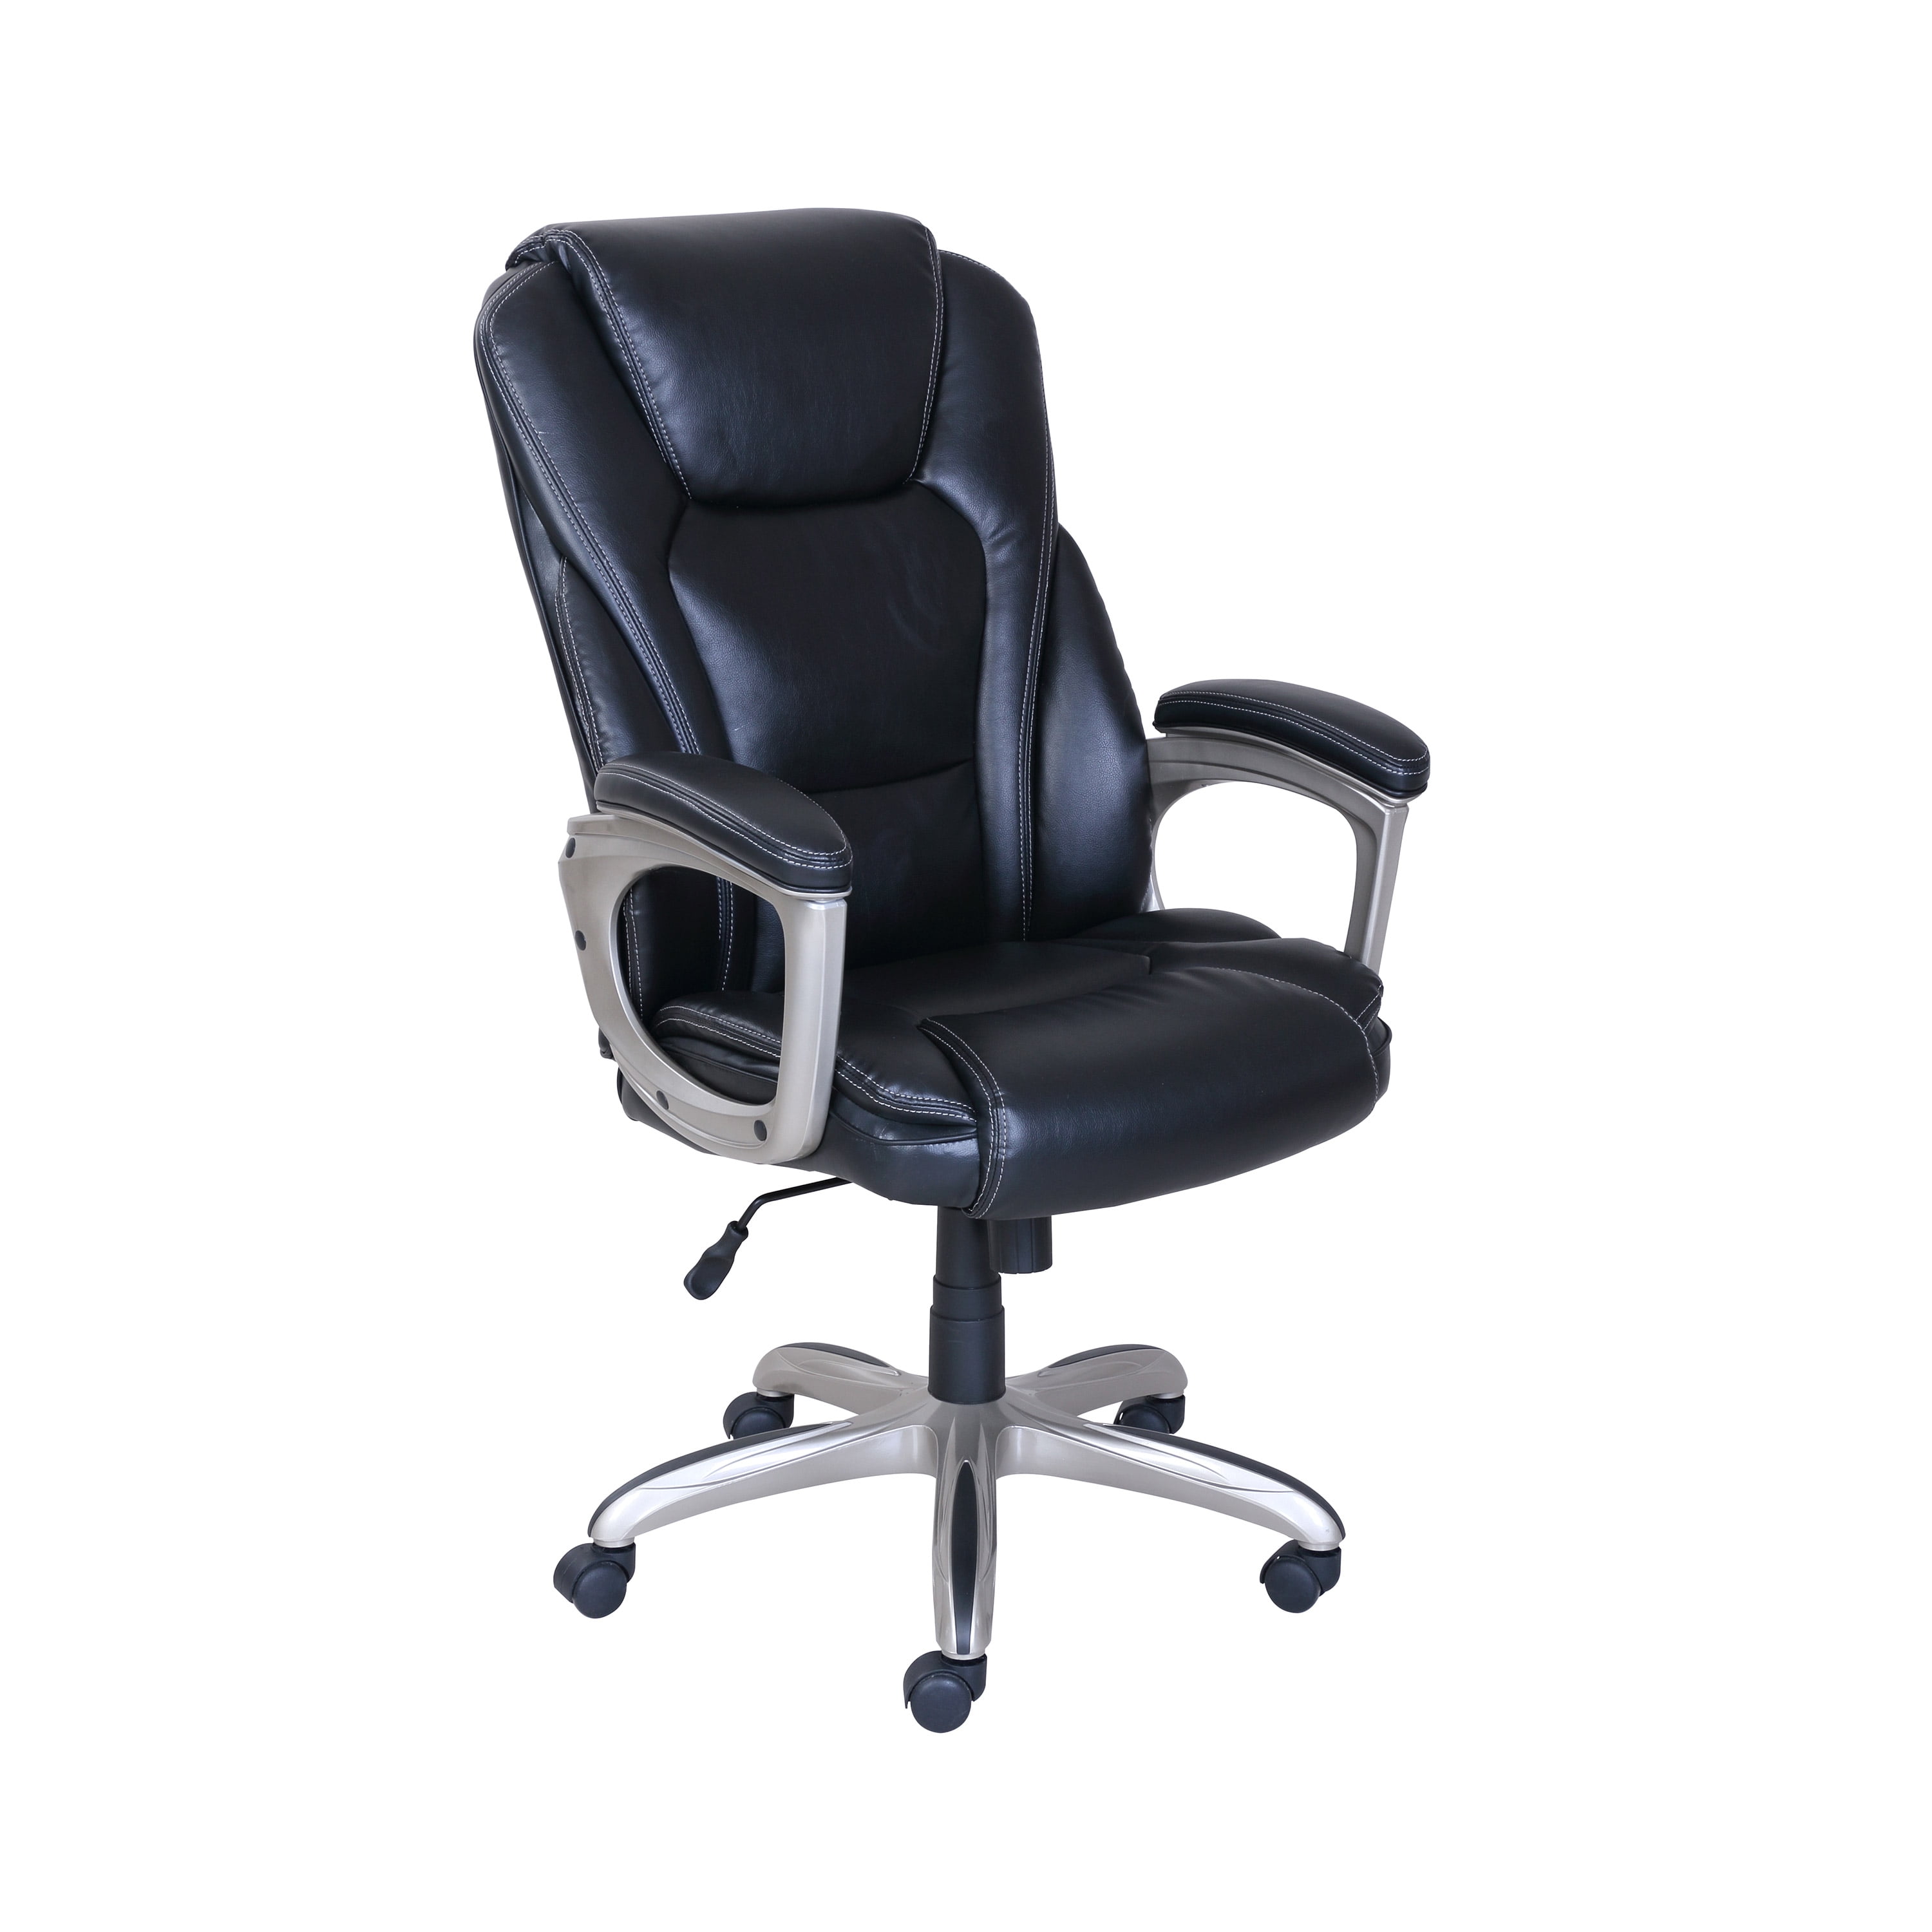 Serta Big Tall Bonded Leather, Serta Big And Tall Office Chair Instructions